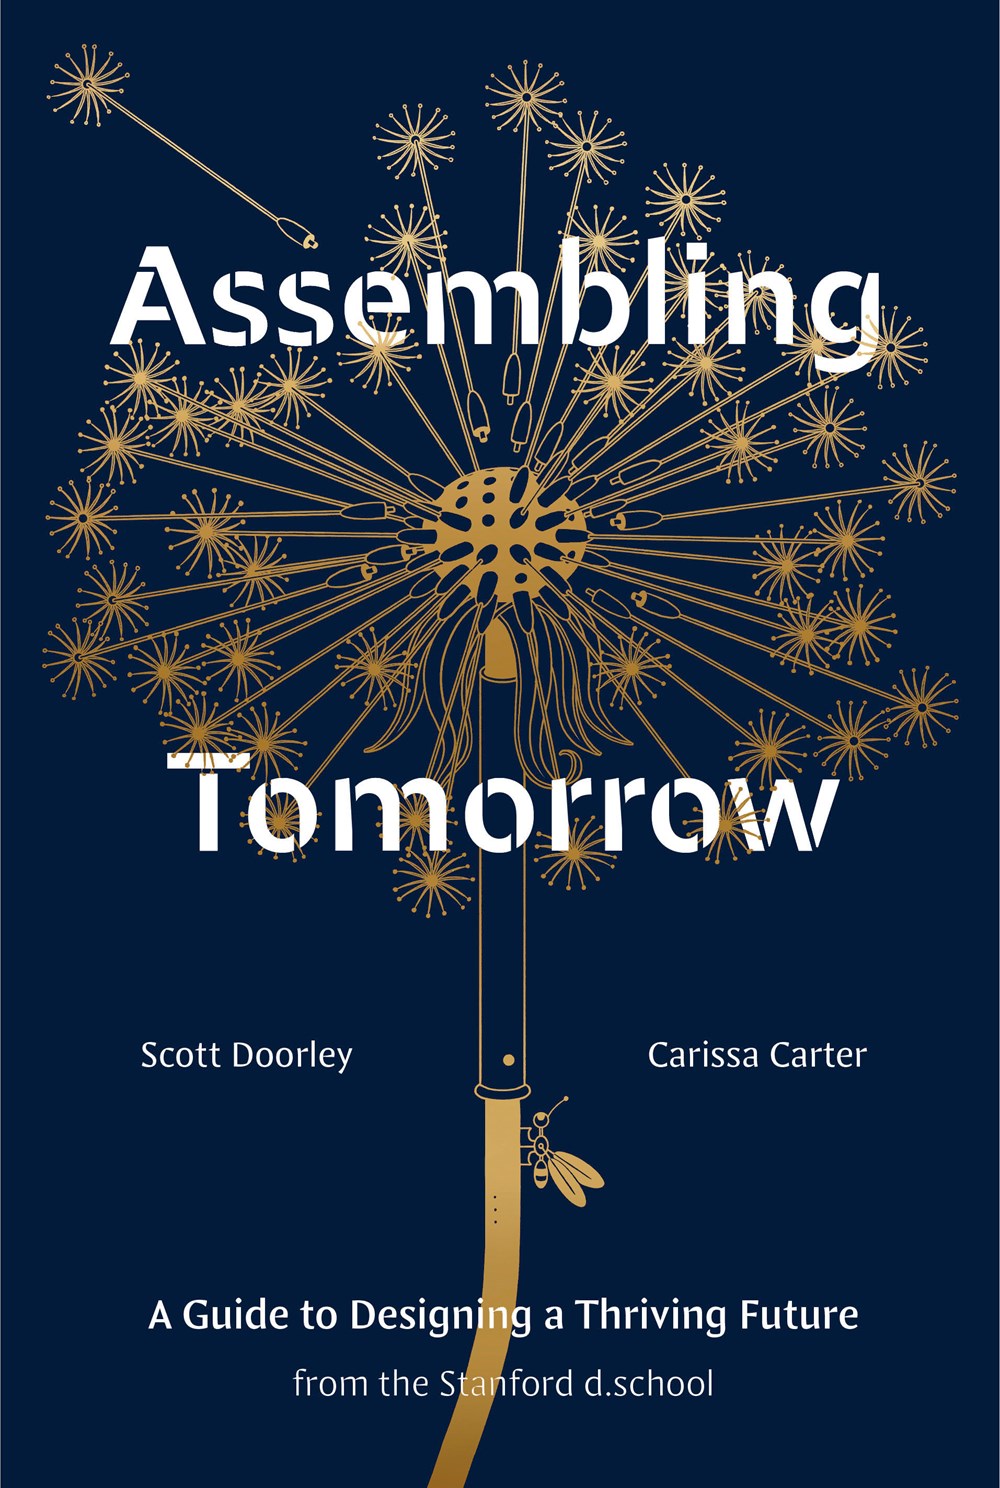 Assembling Tomorrow: A Guide to Designing a Thriving Future from the Stanford D.School